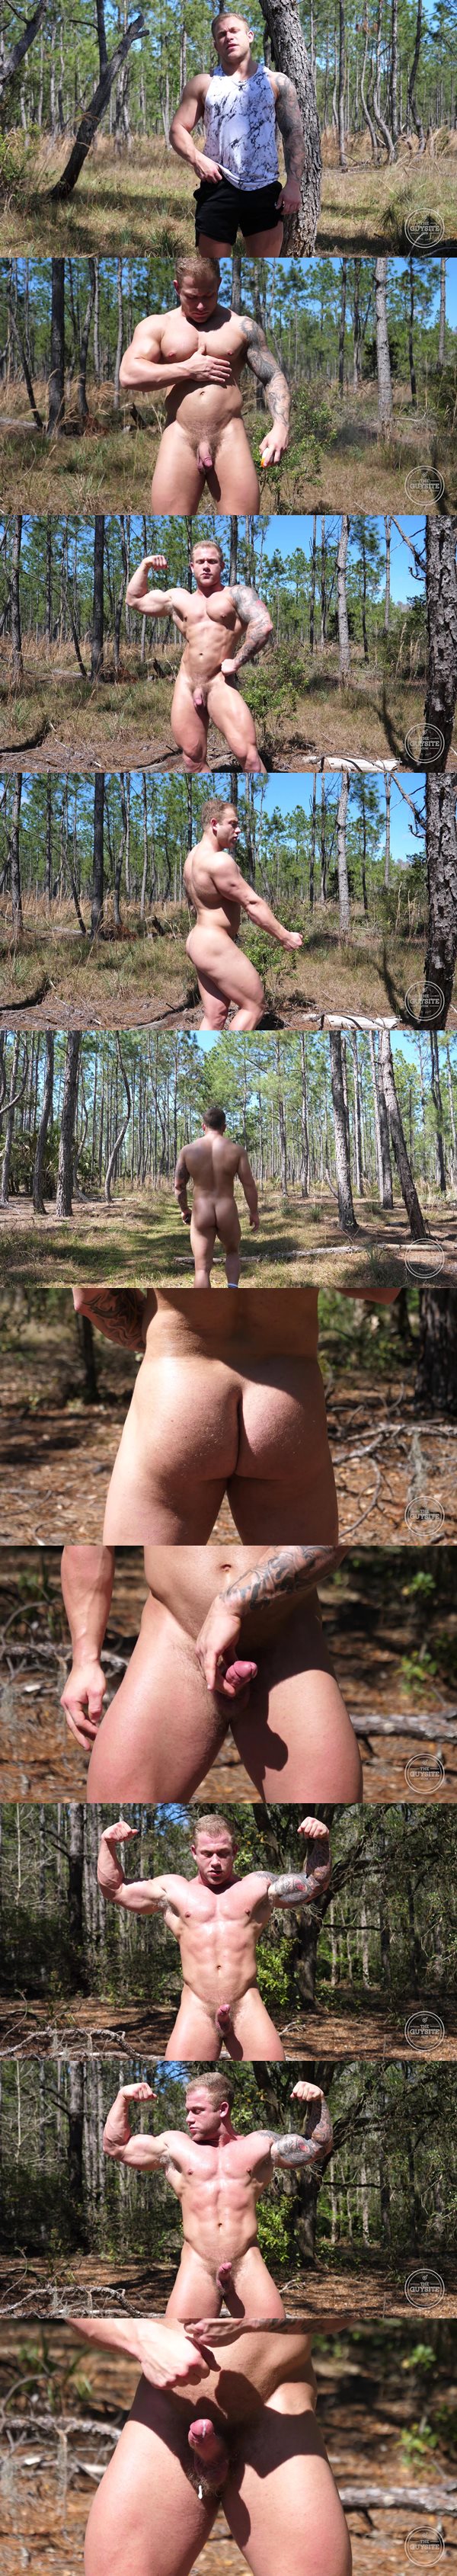 Blond muscle hunk Jake Daniel jerks off in Blond Bodybuilder in the Woods at Theguysite